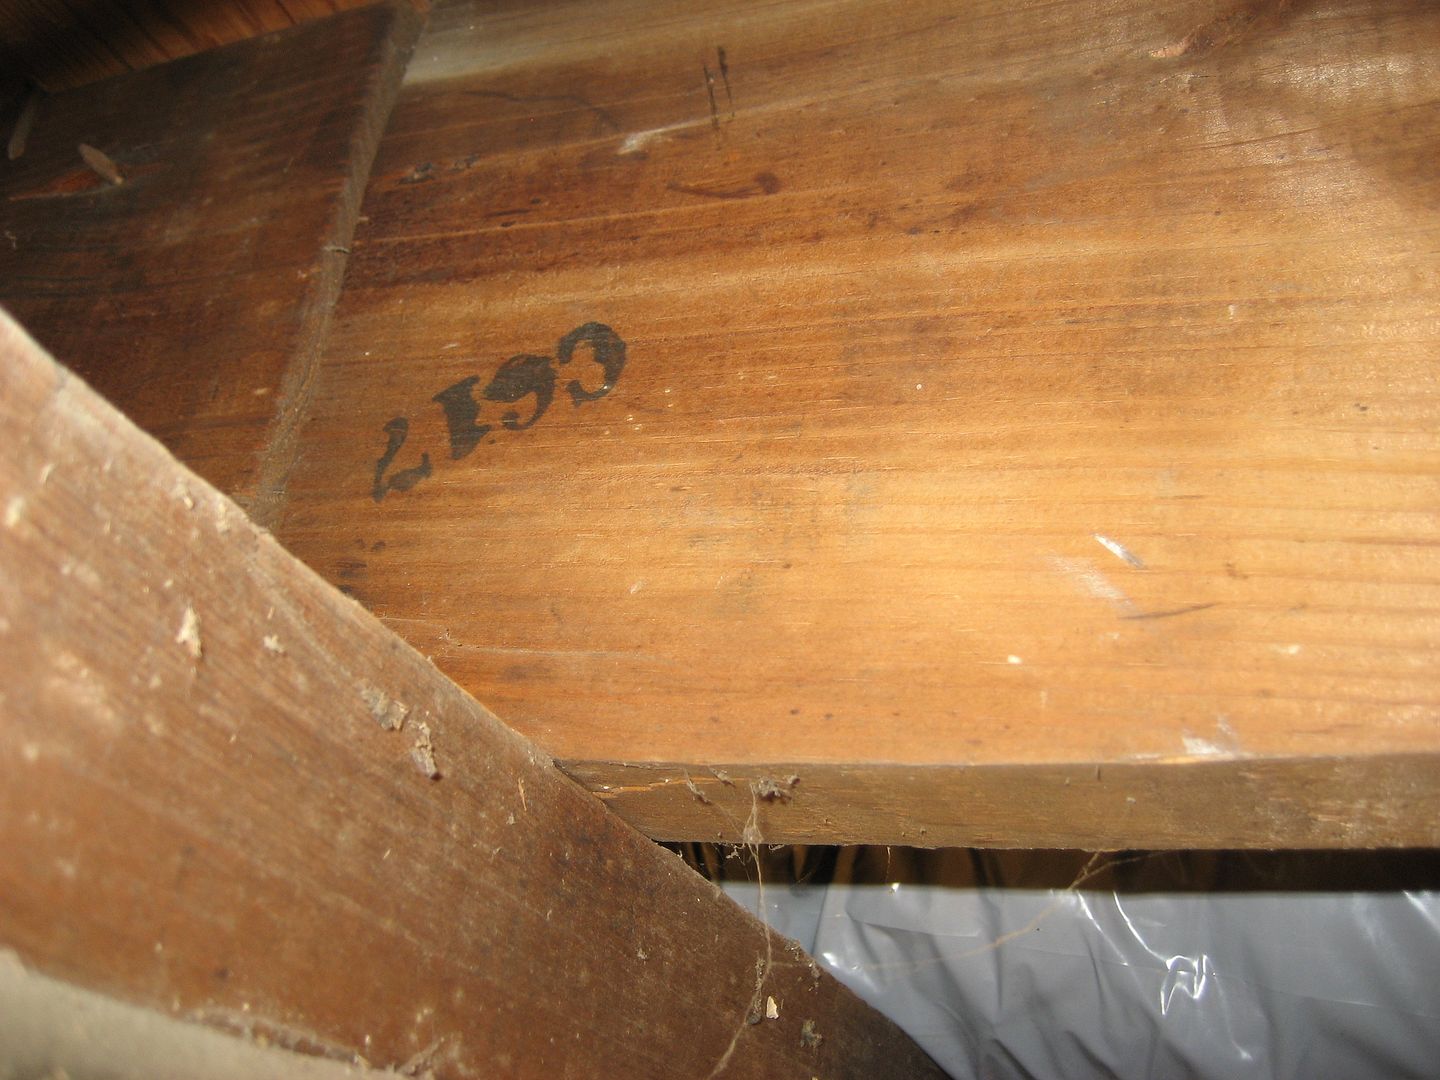 Framing members were marked (as shown) to help facilitate construction.